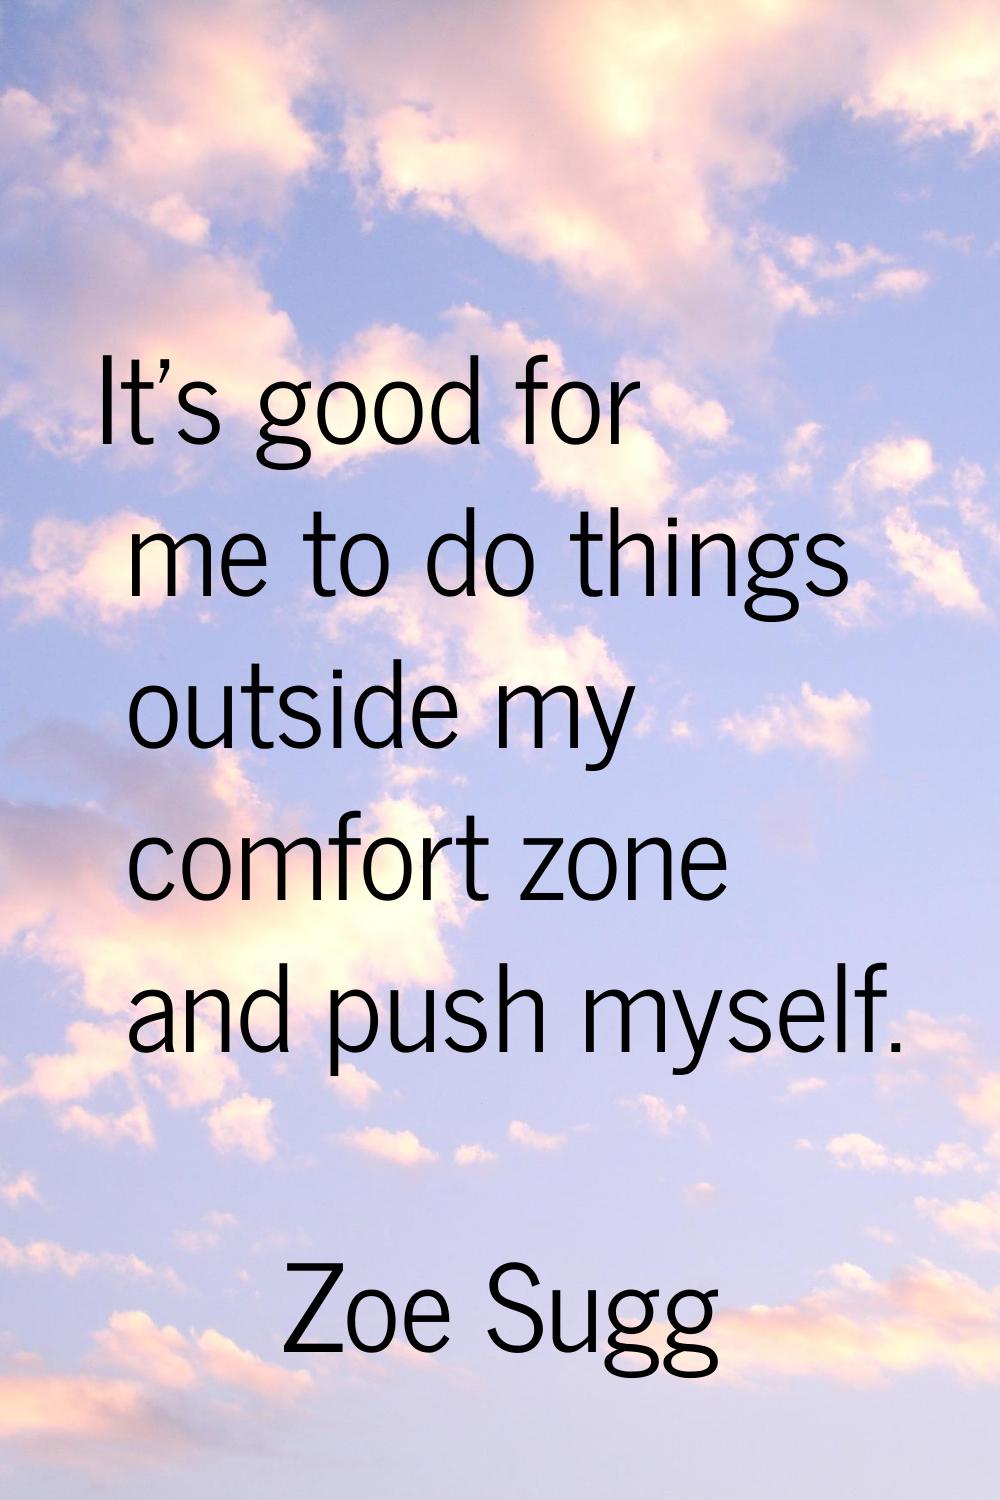 It's good for me to do things outside my comfort zone and push myself.